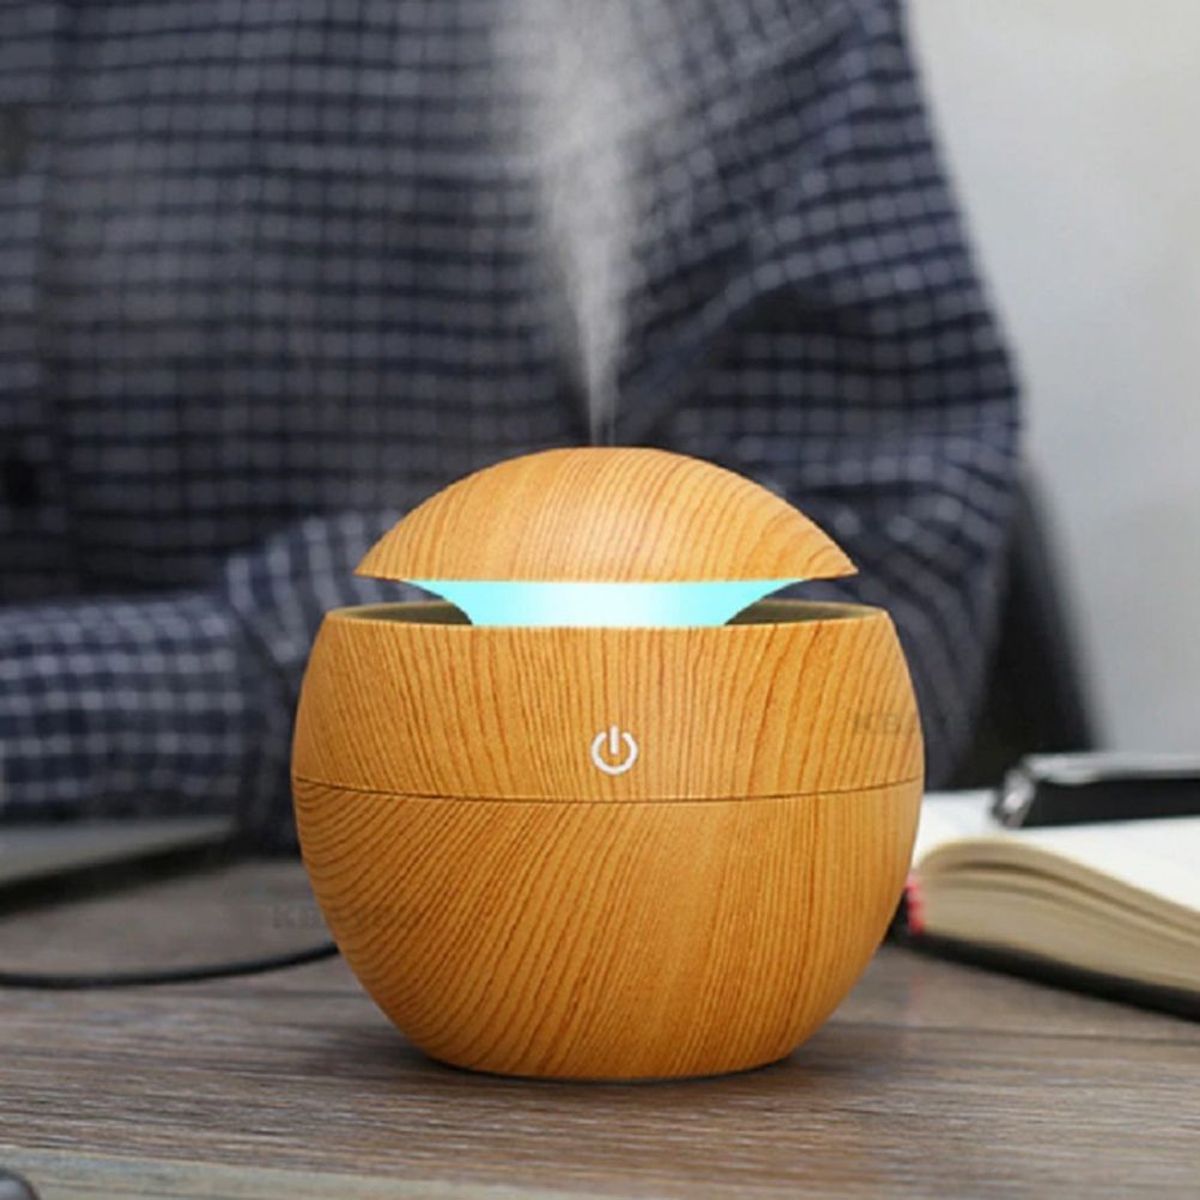 Diffuser of Essential Oils - 7 LEDs changing colors